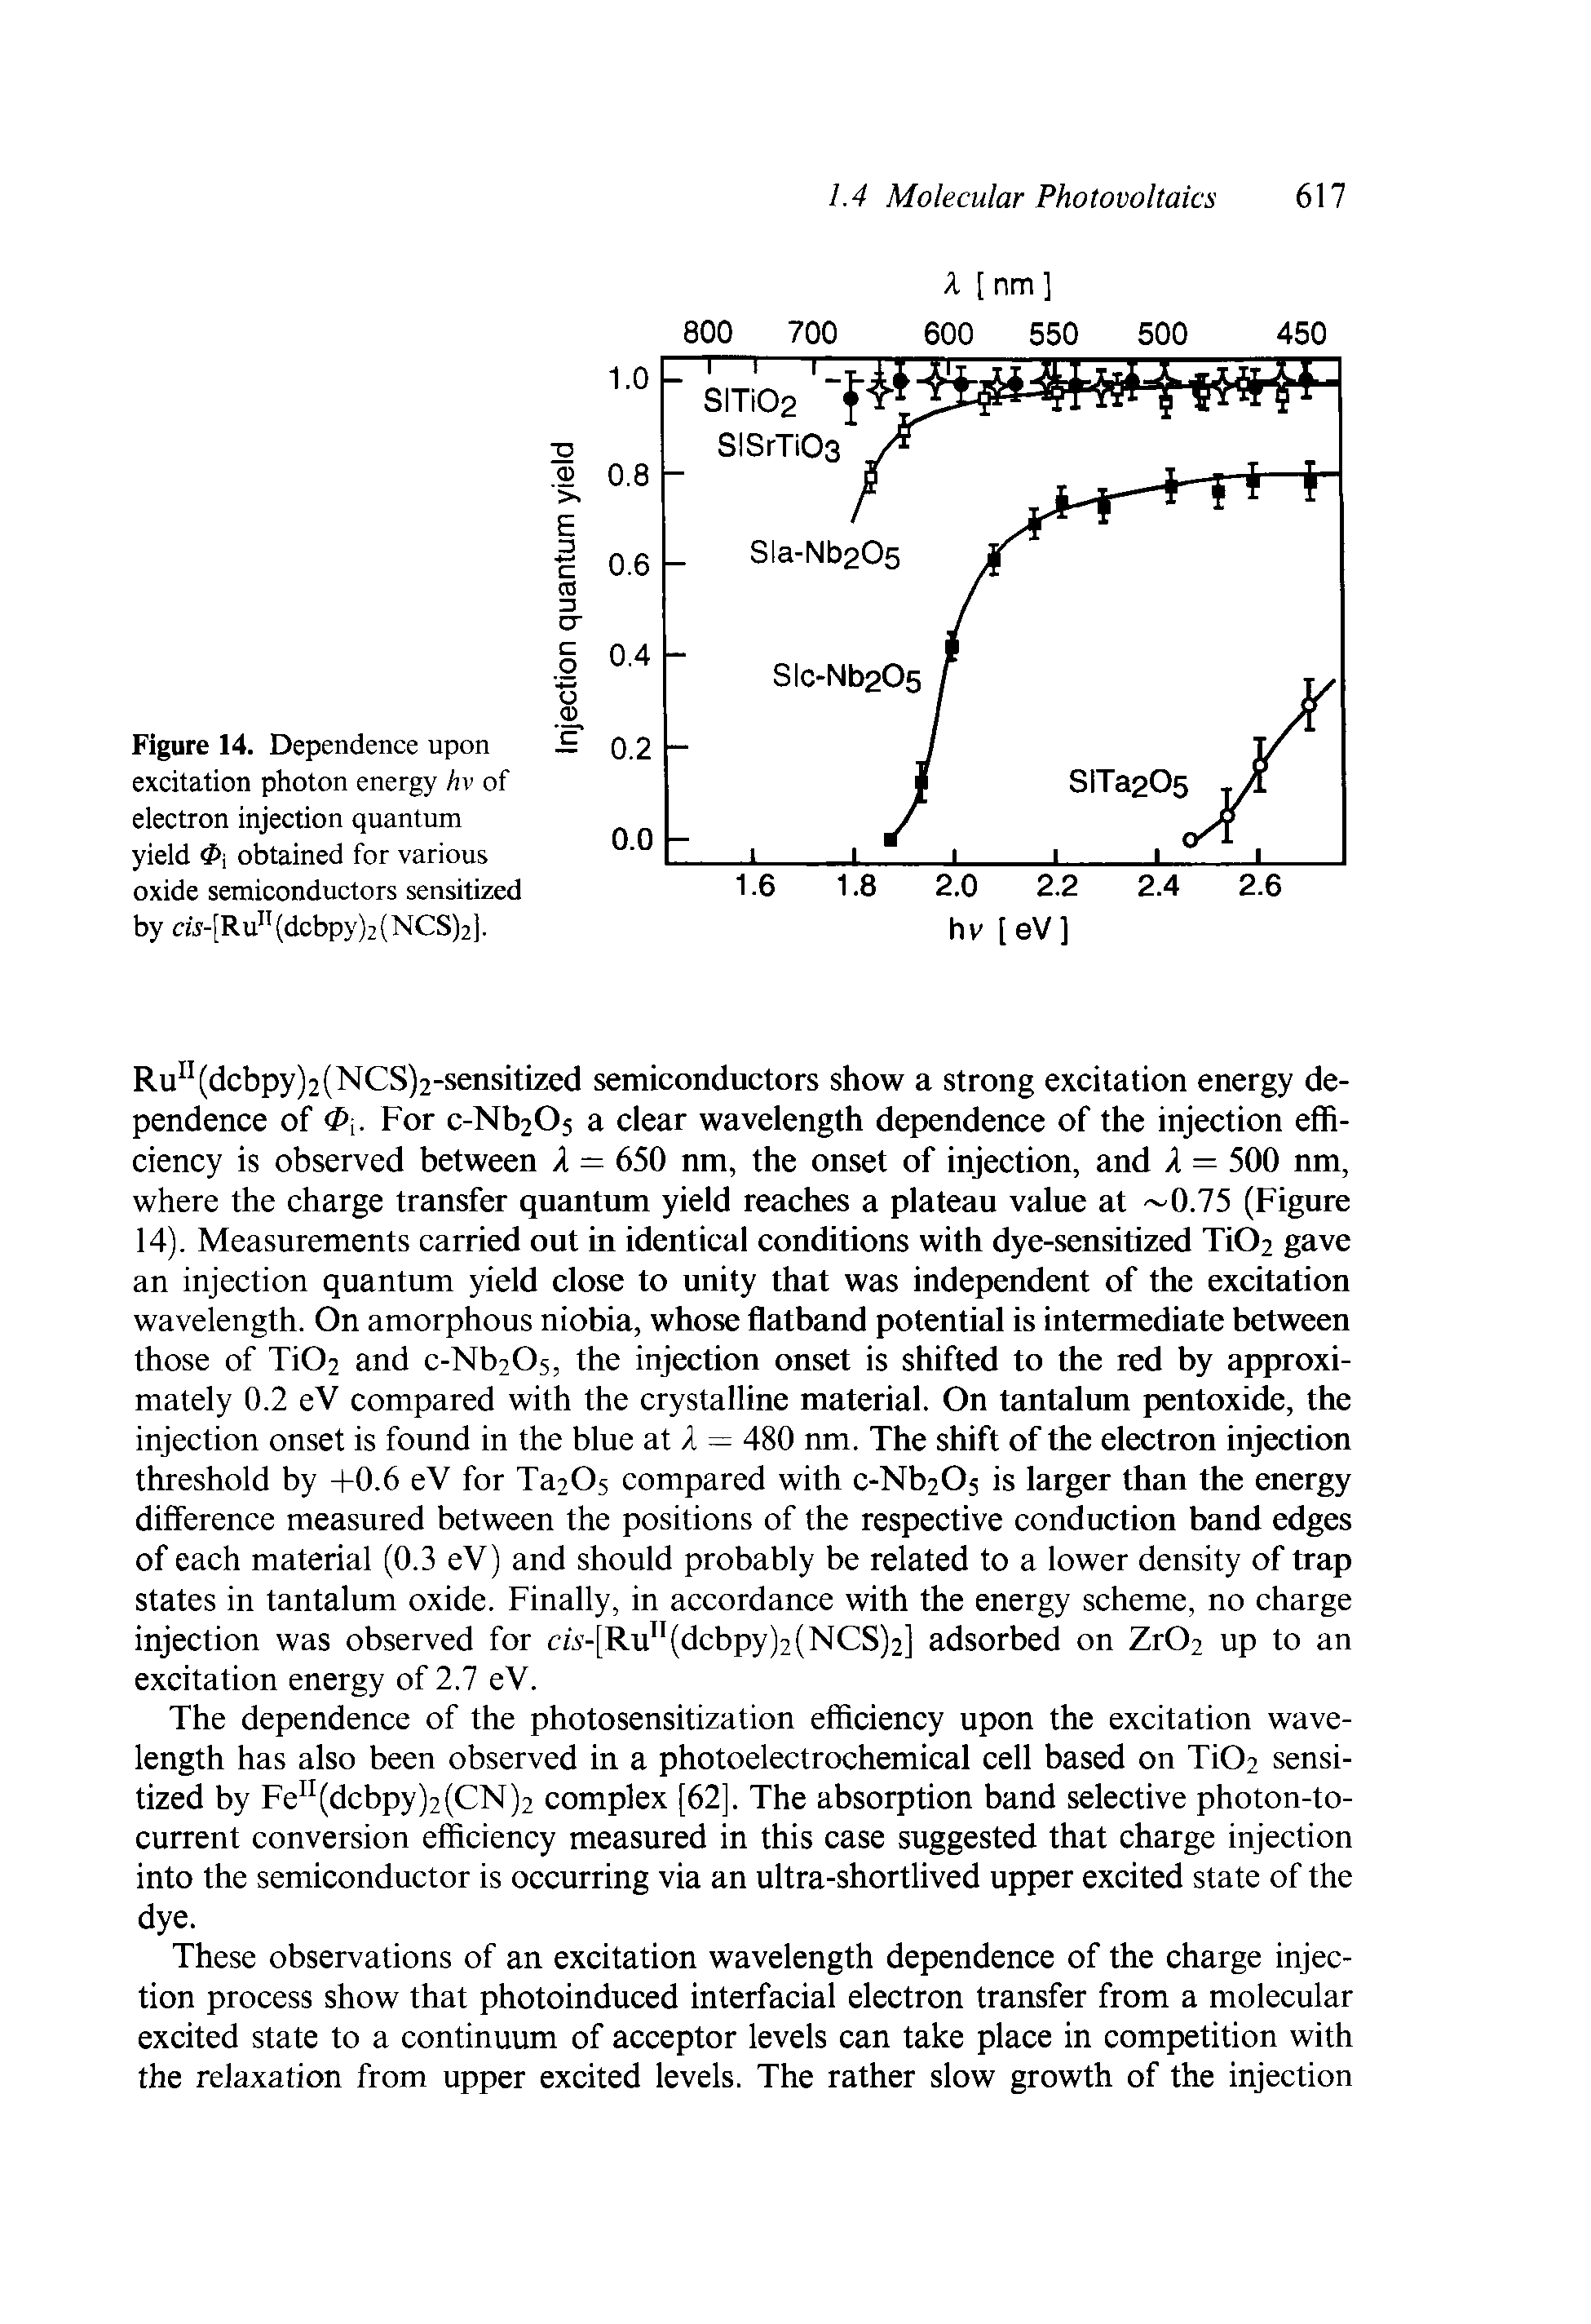 Figure 14. Dependence upon excitation photon energy hv of electron injection quantum yield 4>i obtained for various oxide semiconductors sensitized by cw-[Ru dcbpy)2(NCS)2].